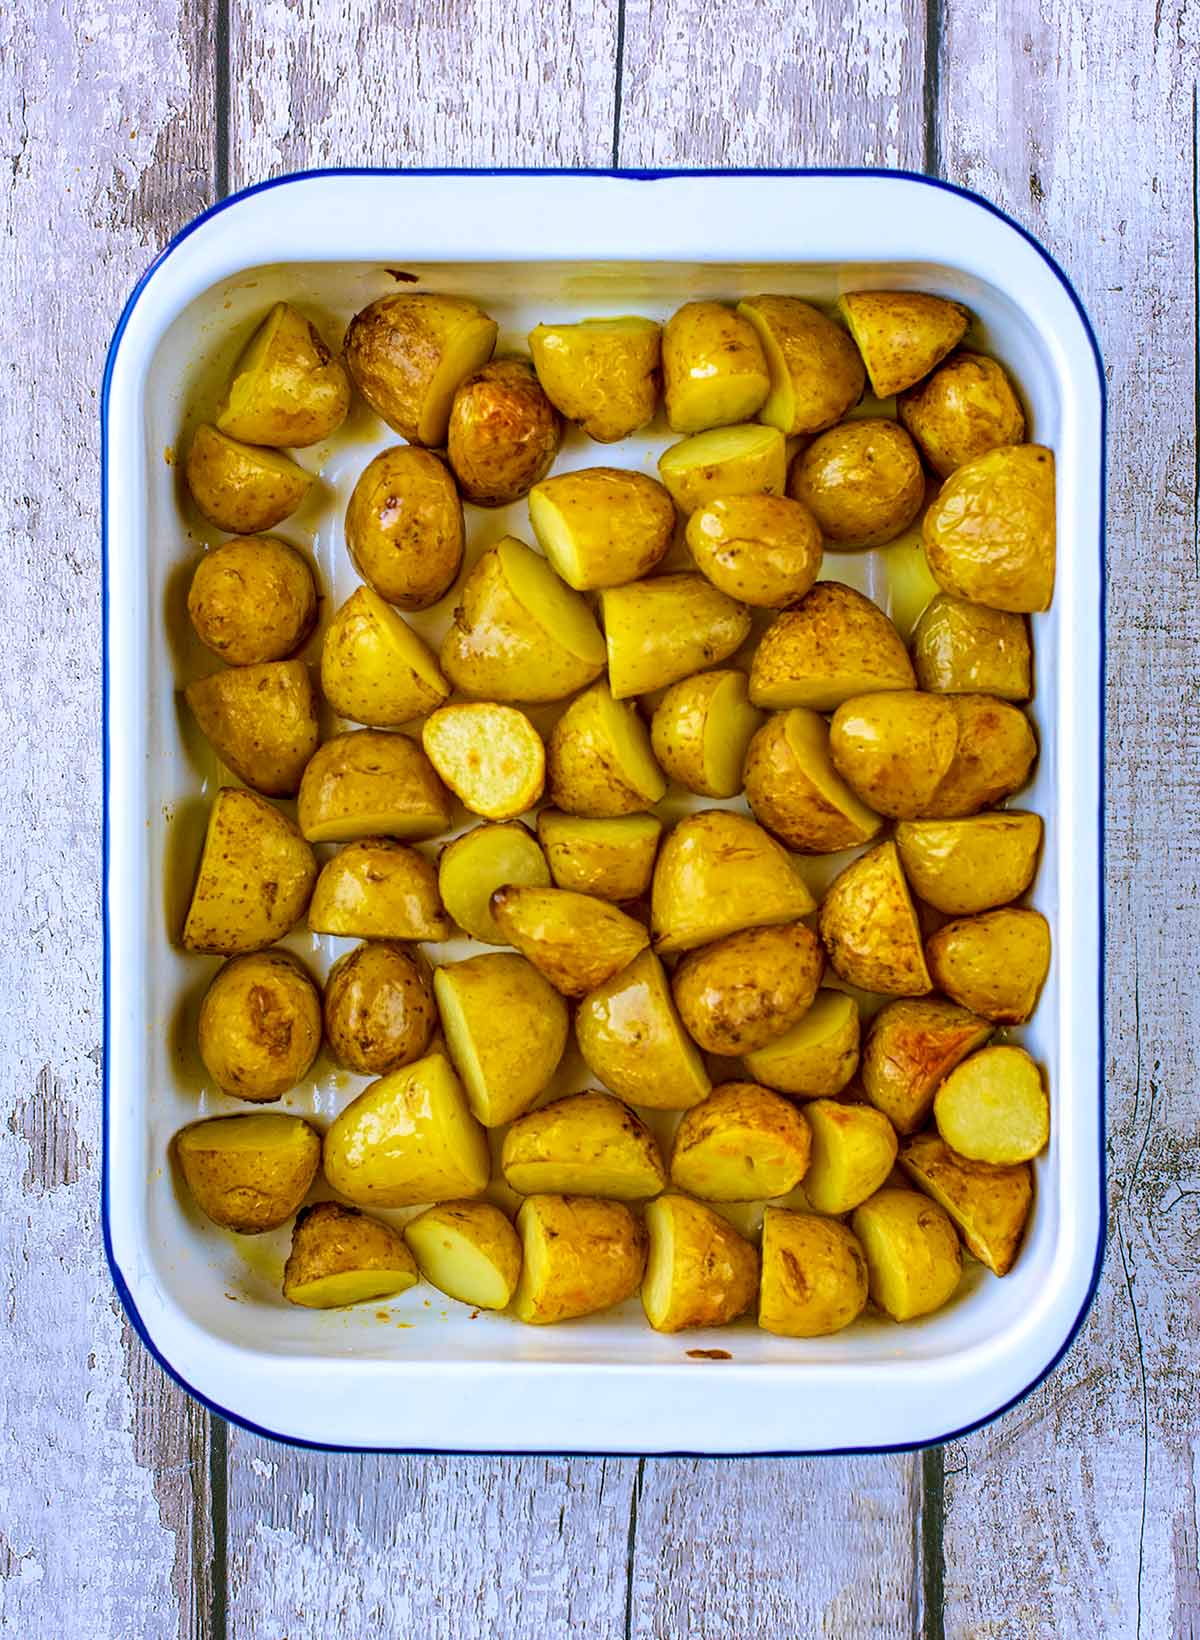 A baking tin containing roasted new potatoes.